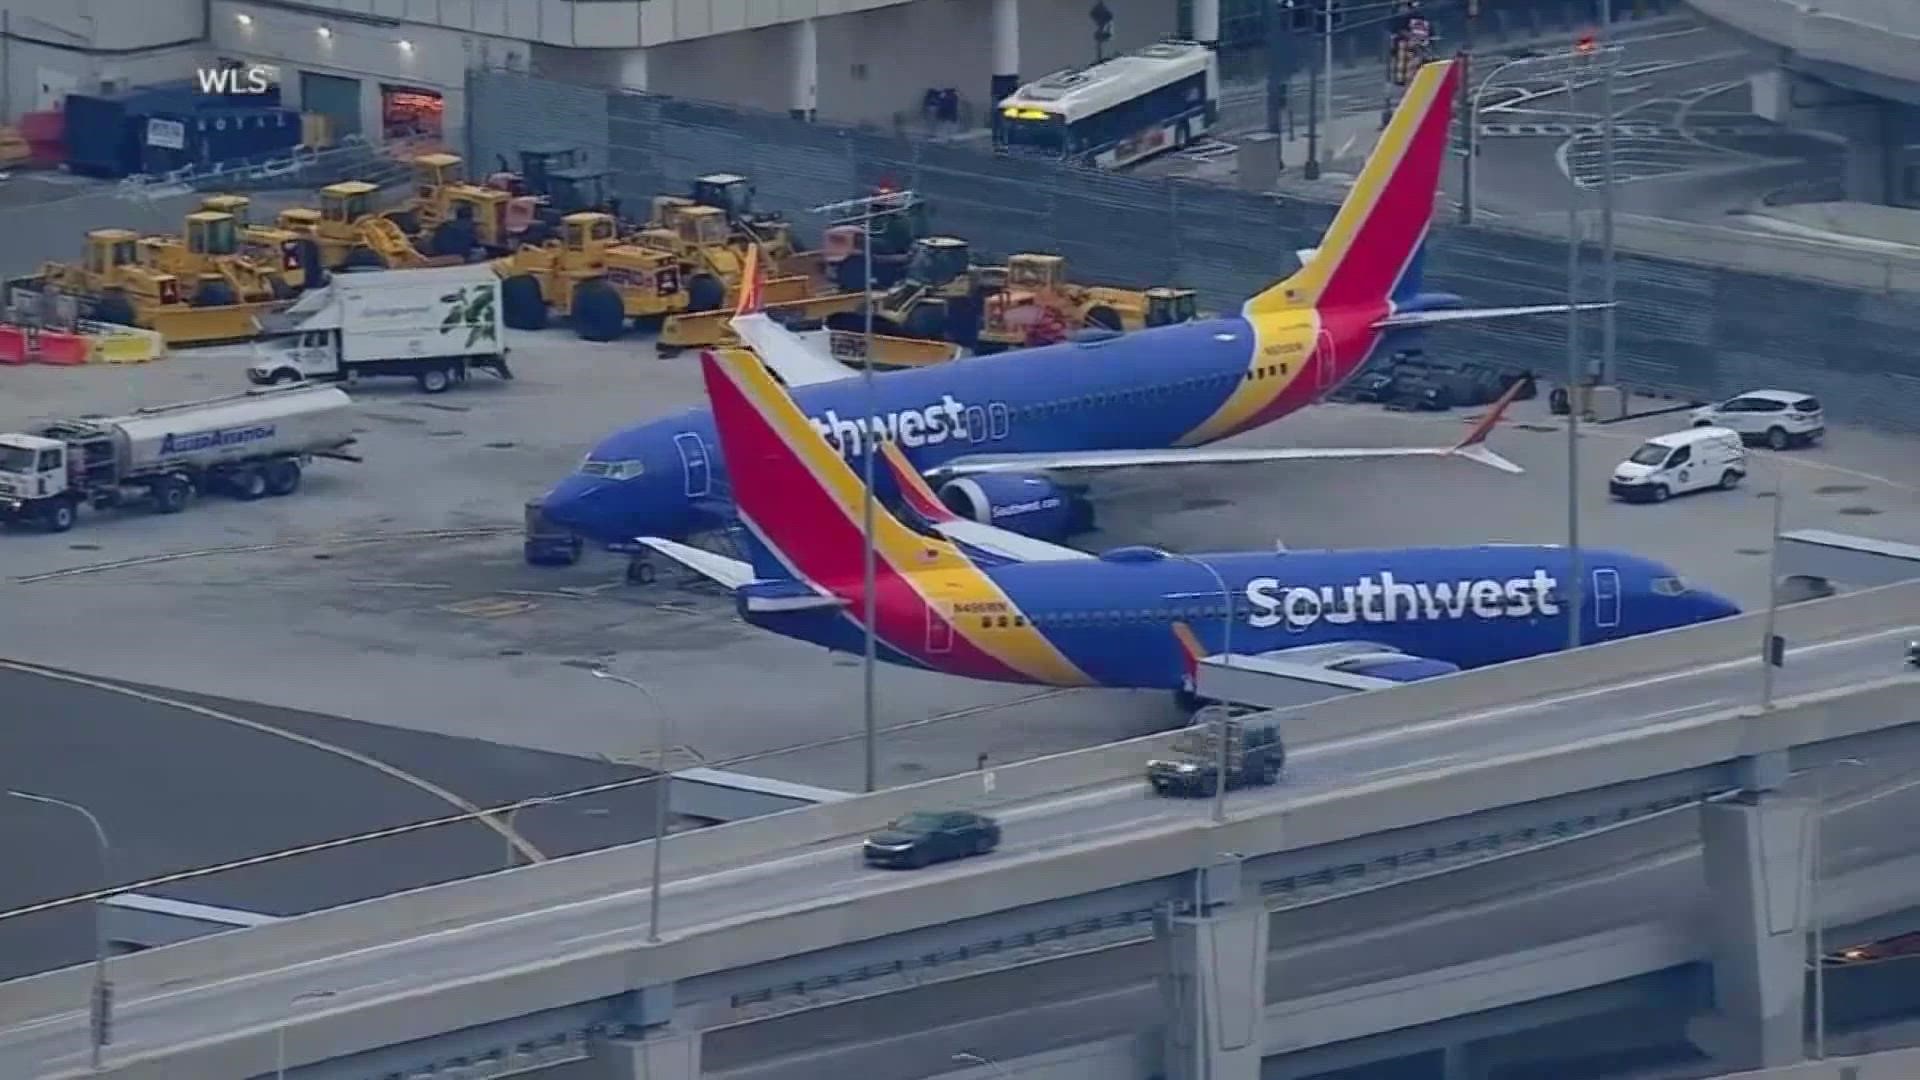 The U.S. Transportation Department is now investigating what happened at Southwest, which carries more passengers within the United States than any other airline.